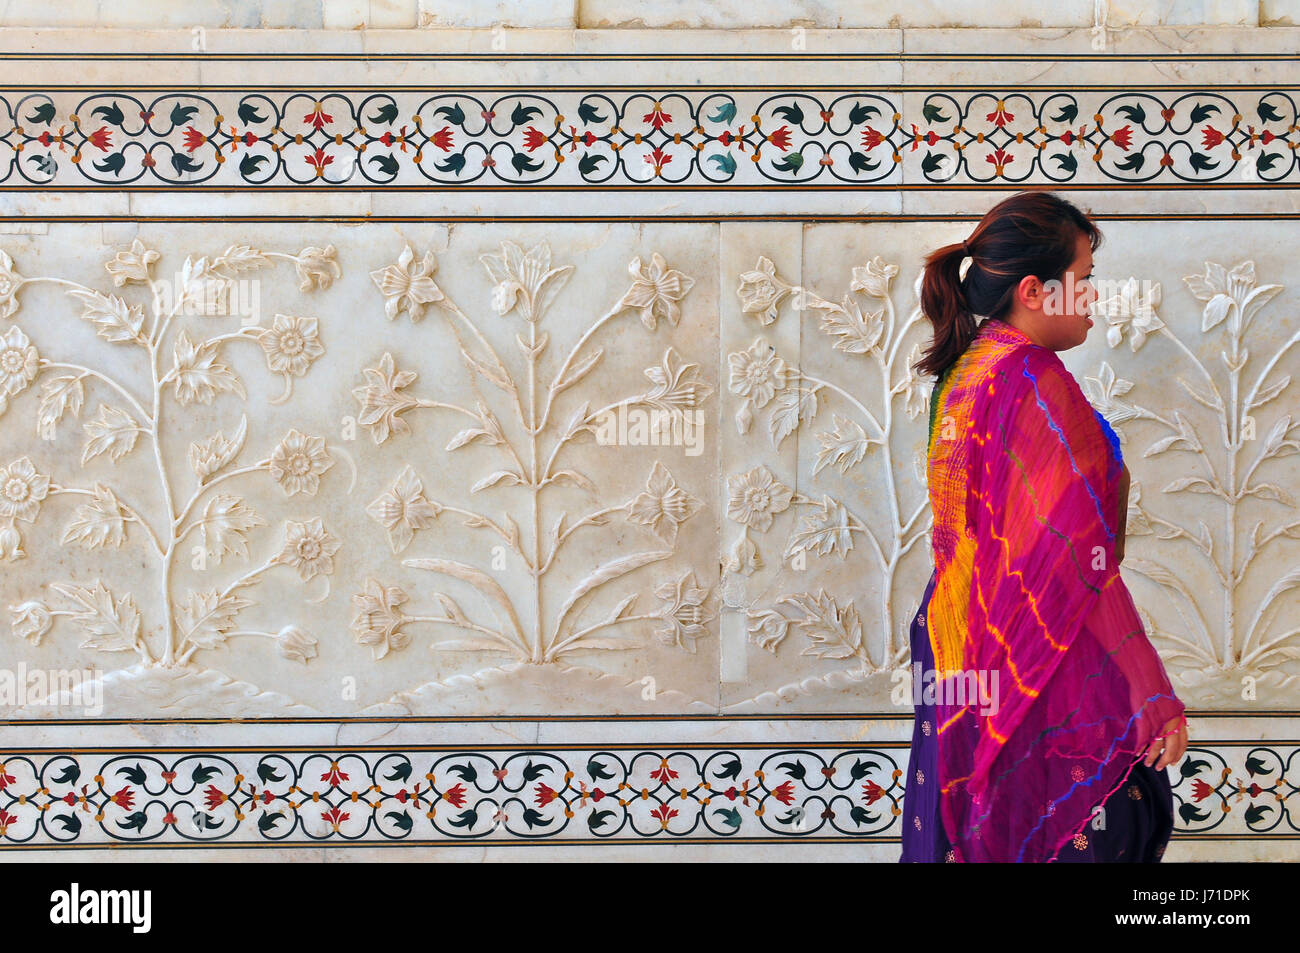 A girl with a colourful shawl walks past an intricately carved marble wall with inlaid stones. Stock Photo